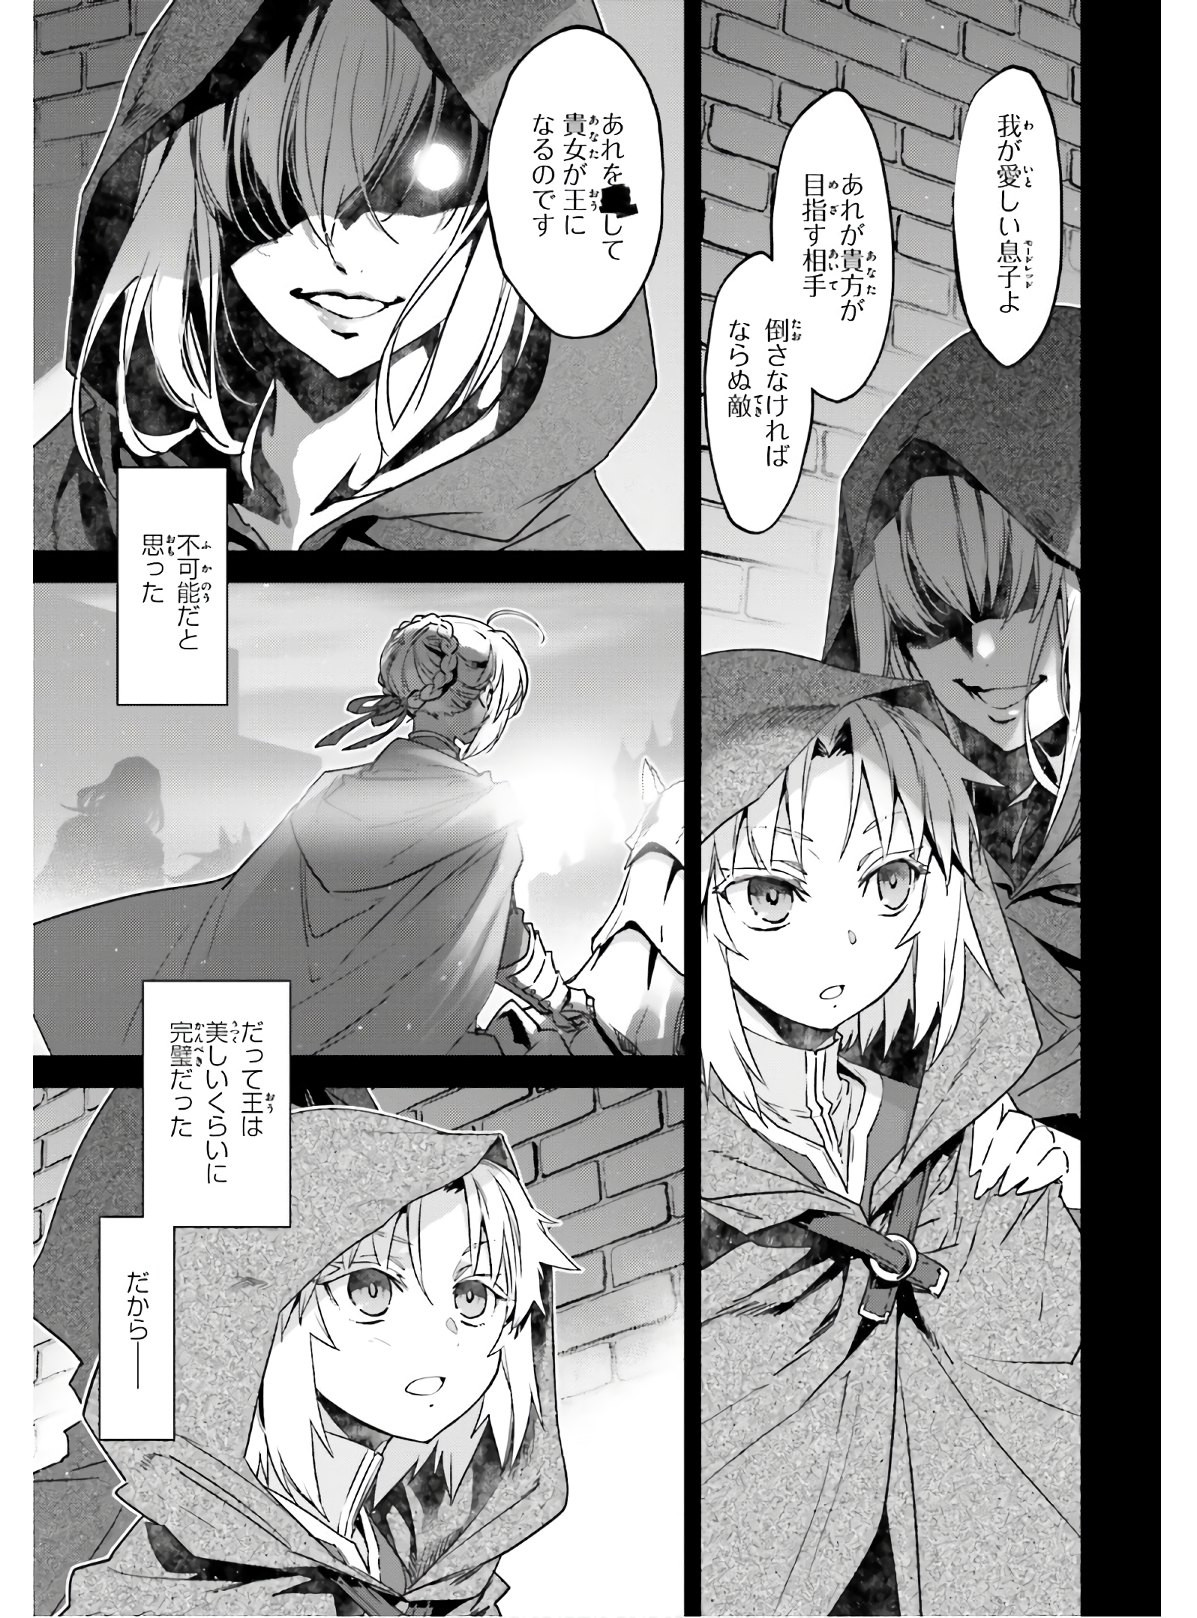 Fate-Apocrypha - Chapter 42 - Page 3